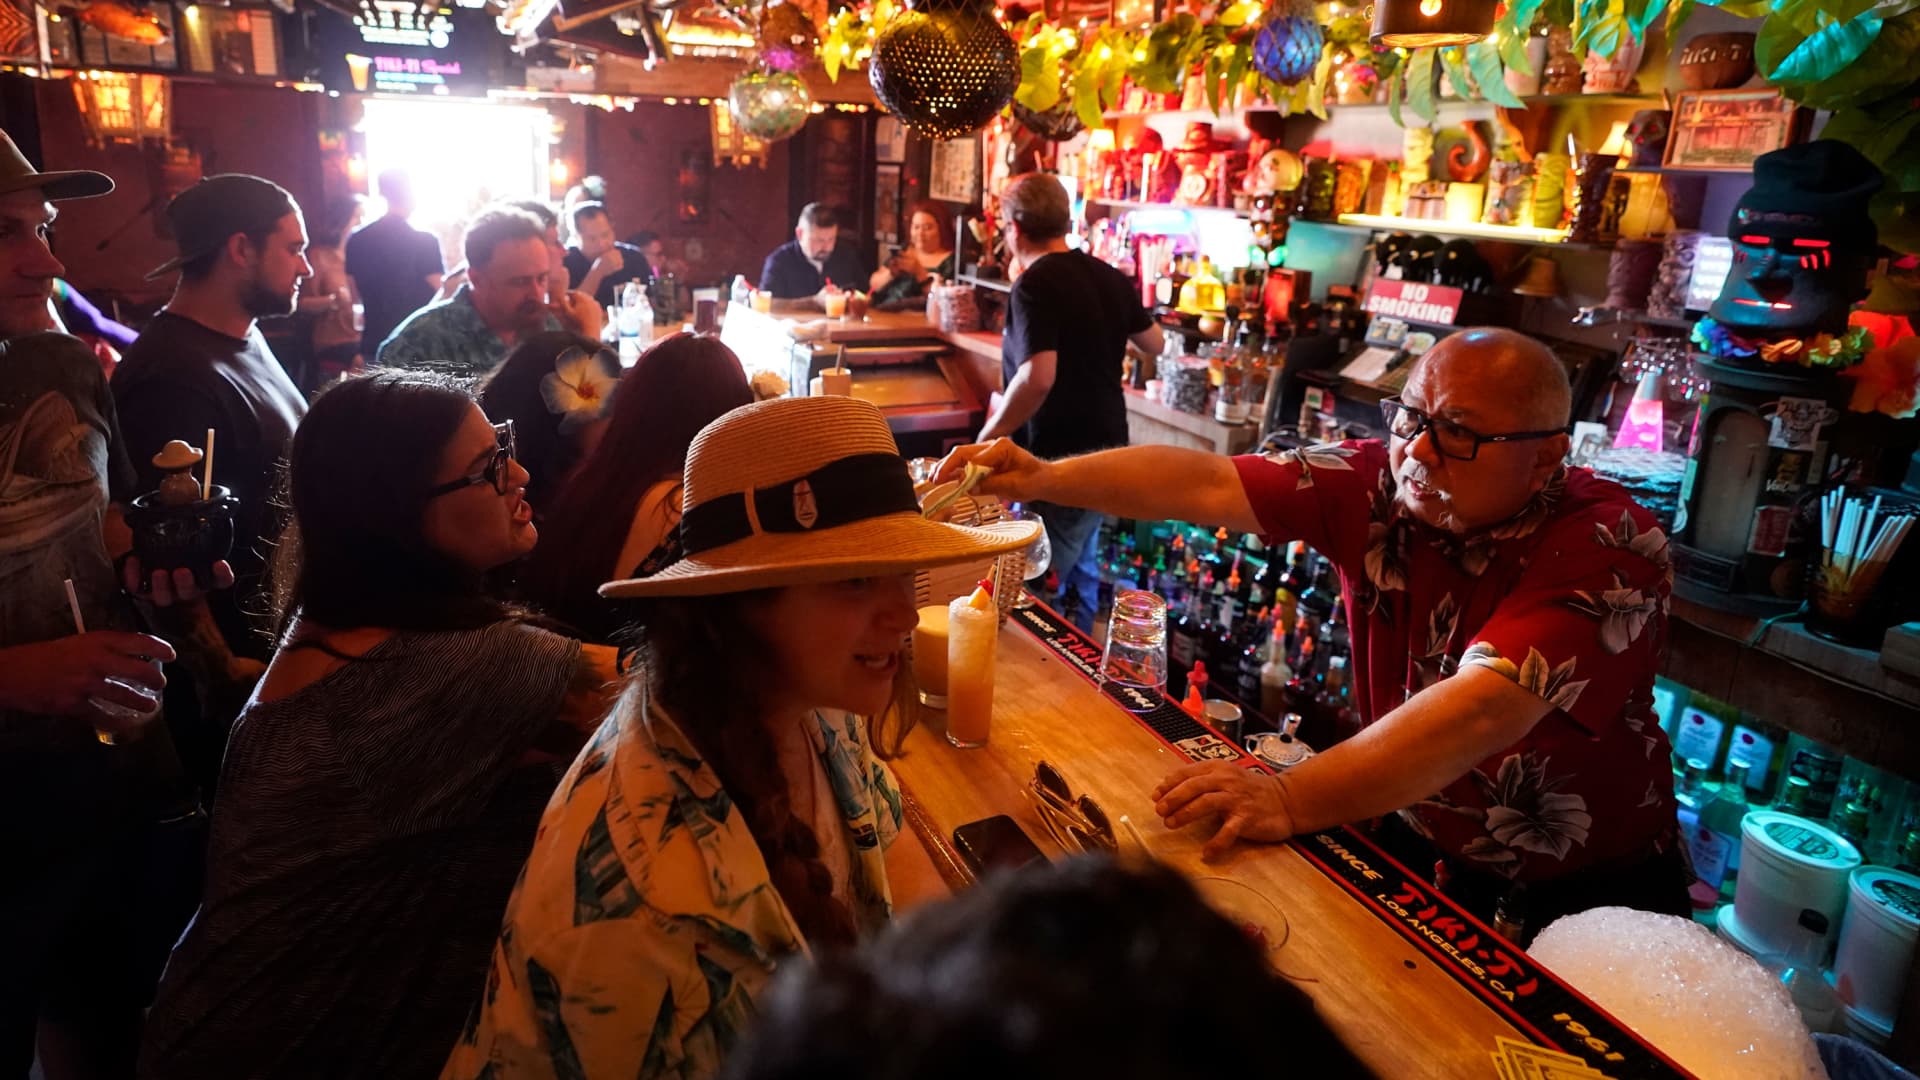 Patrons enjoy cocktails in the interior of the Tiki-Ti bar in Los Angeles, California, July 7, 2021.